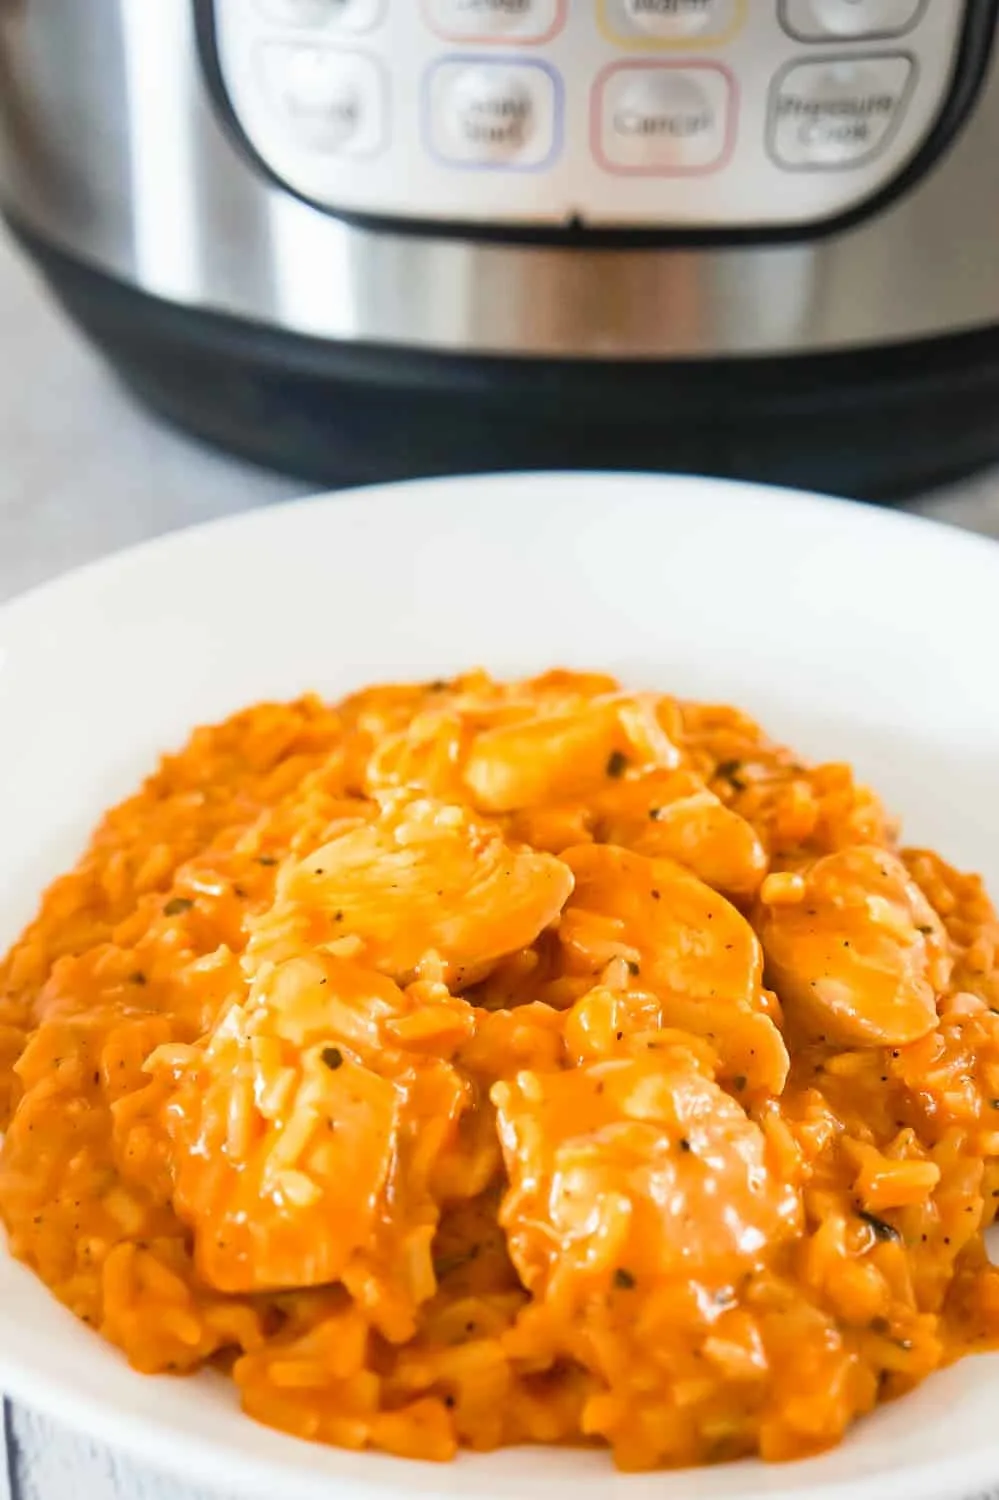 Instant Pot Tomato Basil Chicken and Rice is an easy and delicious pressure cooker recipe. This creamy chicken and rice dish is made with tomato soup and basil pesto.